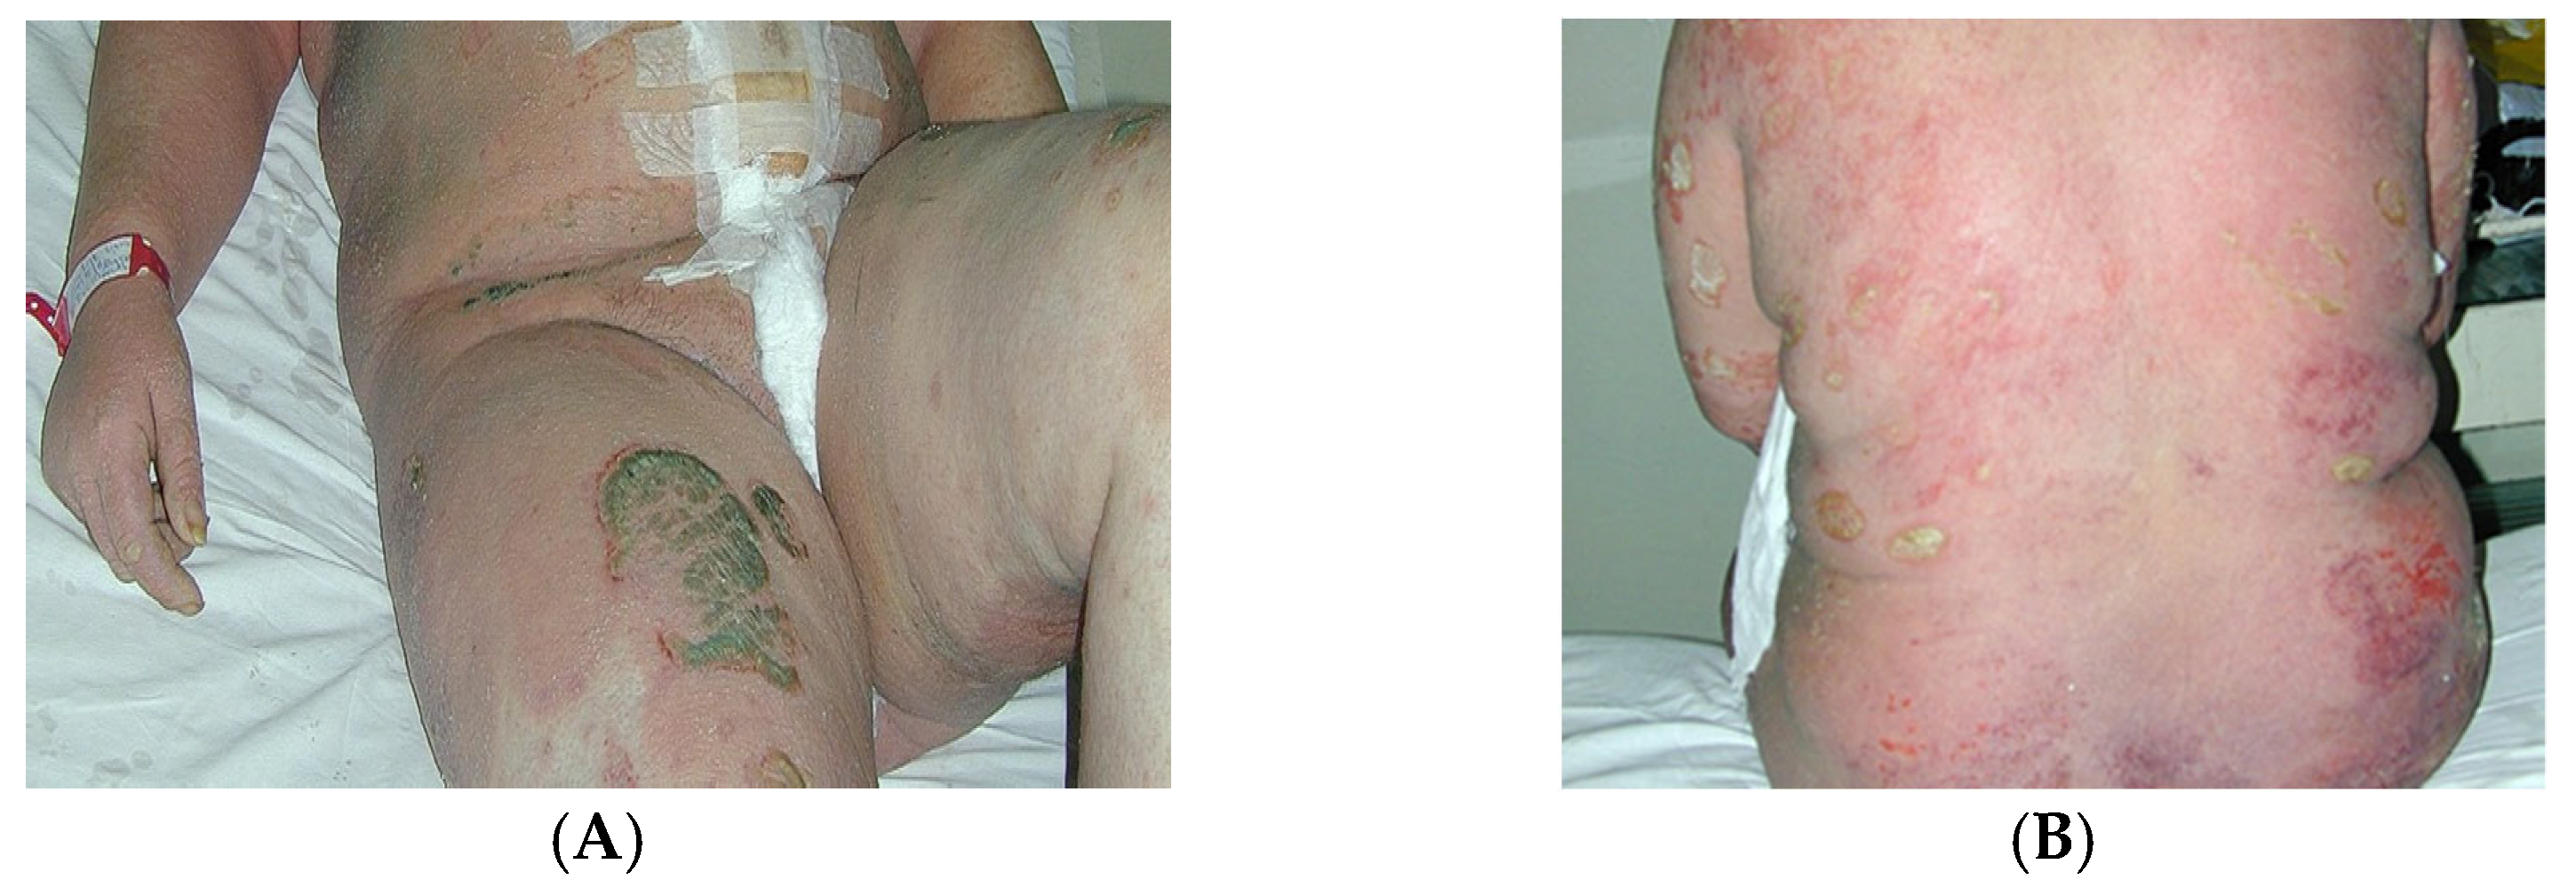 psoriasis remission during pregnancy